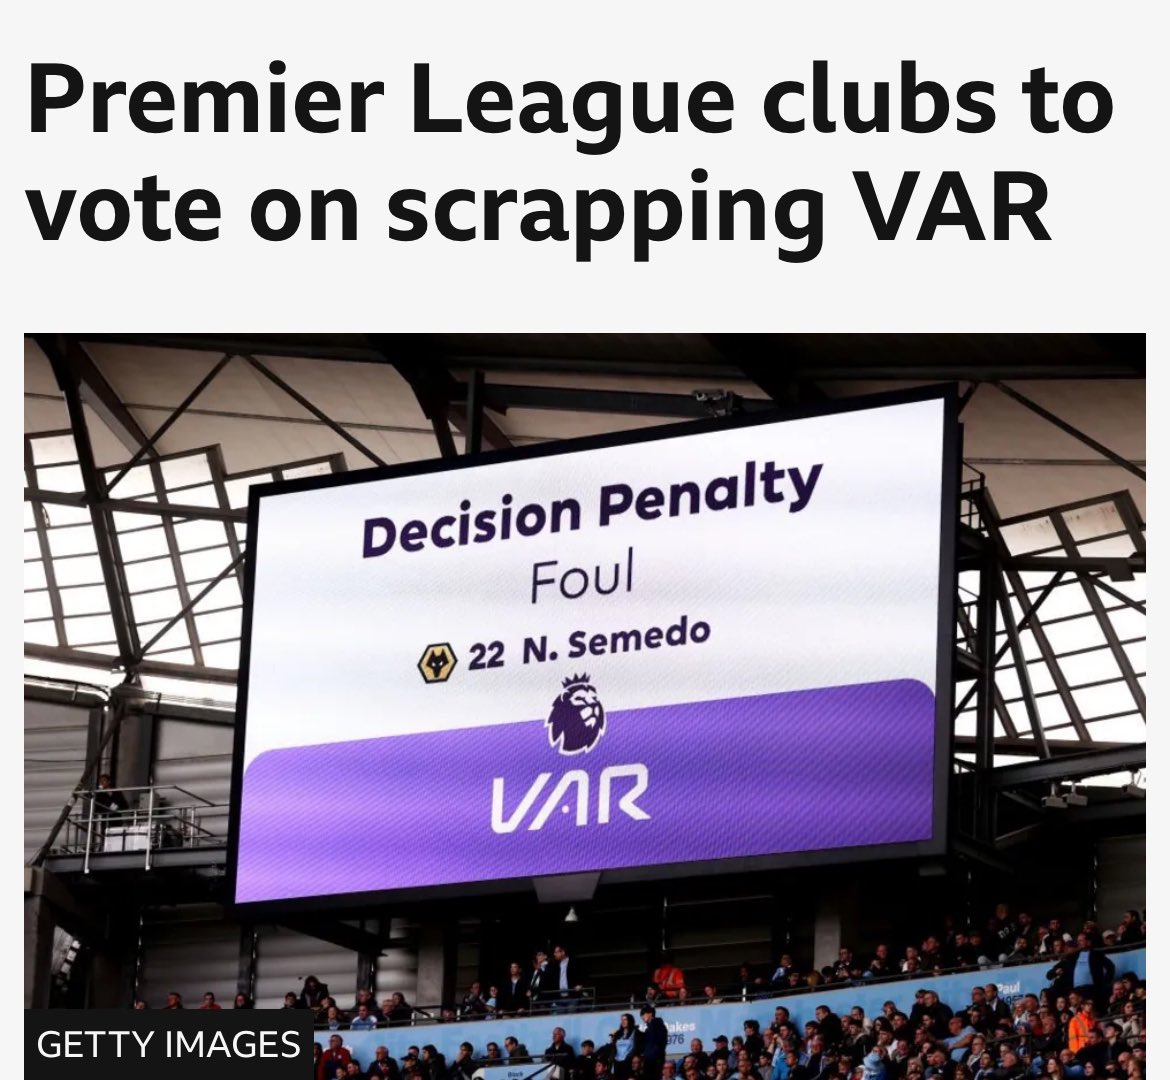 PL Clubs will vote on whether to keep VAR on 6th June after Wolves brought forward the resolution. Should we ditch VAR?